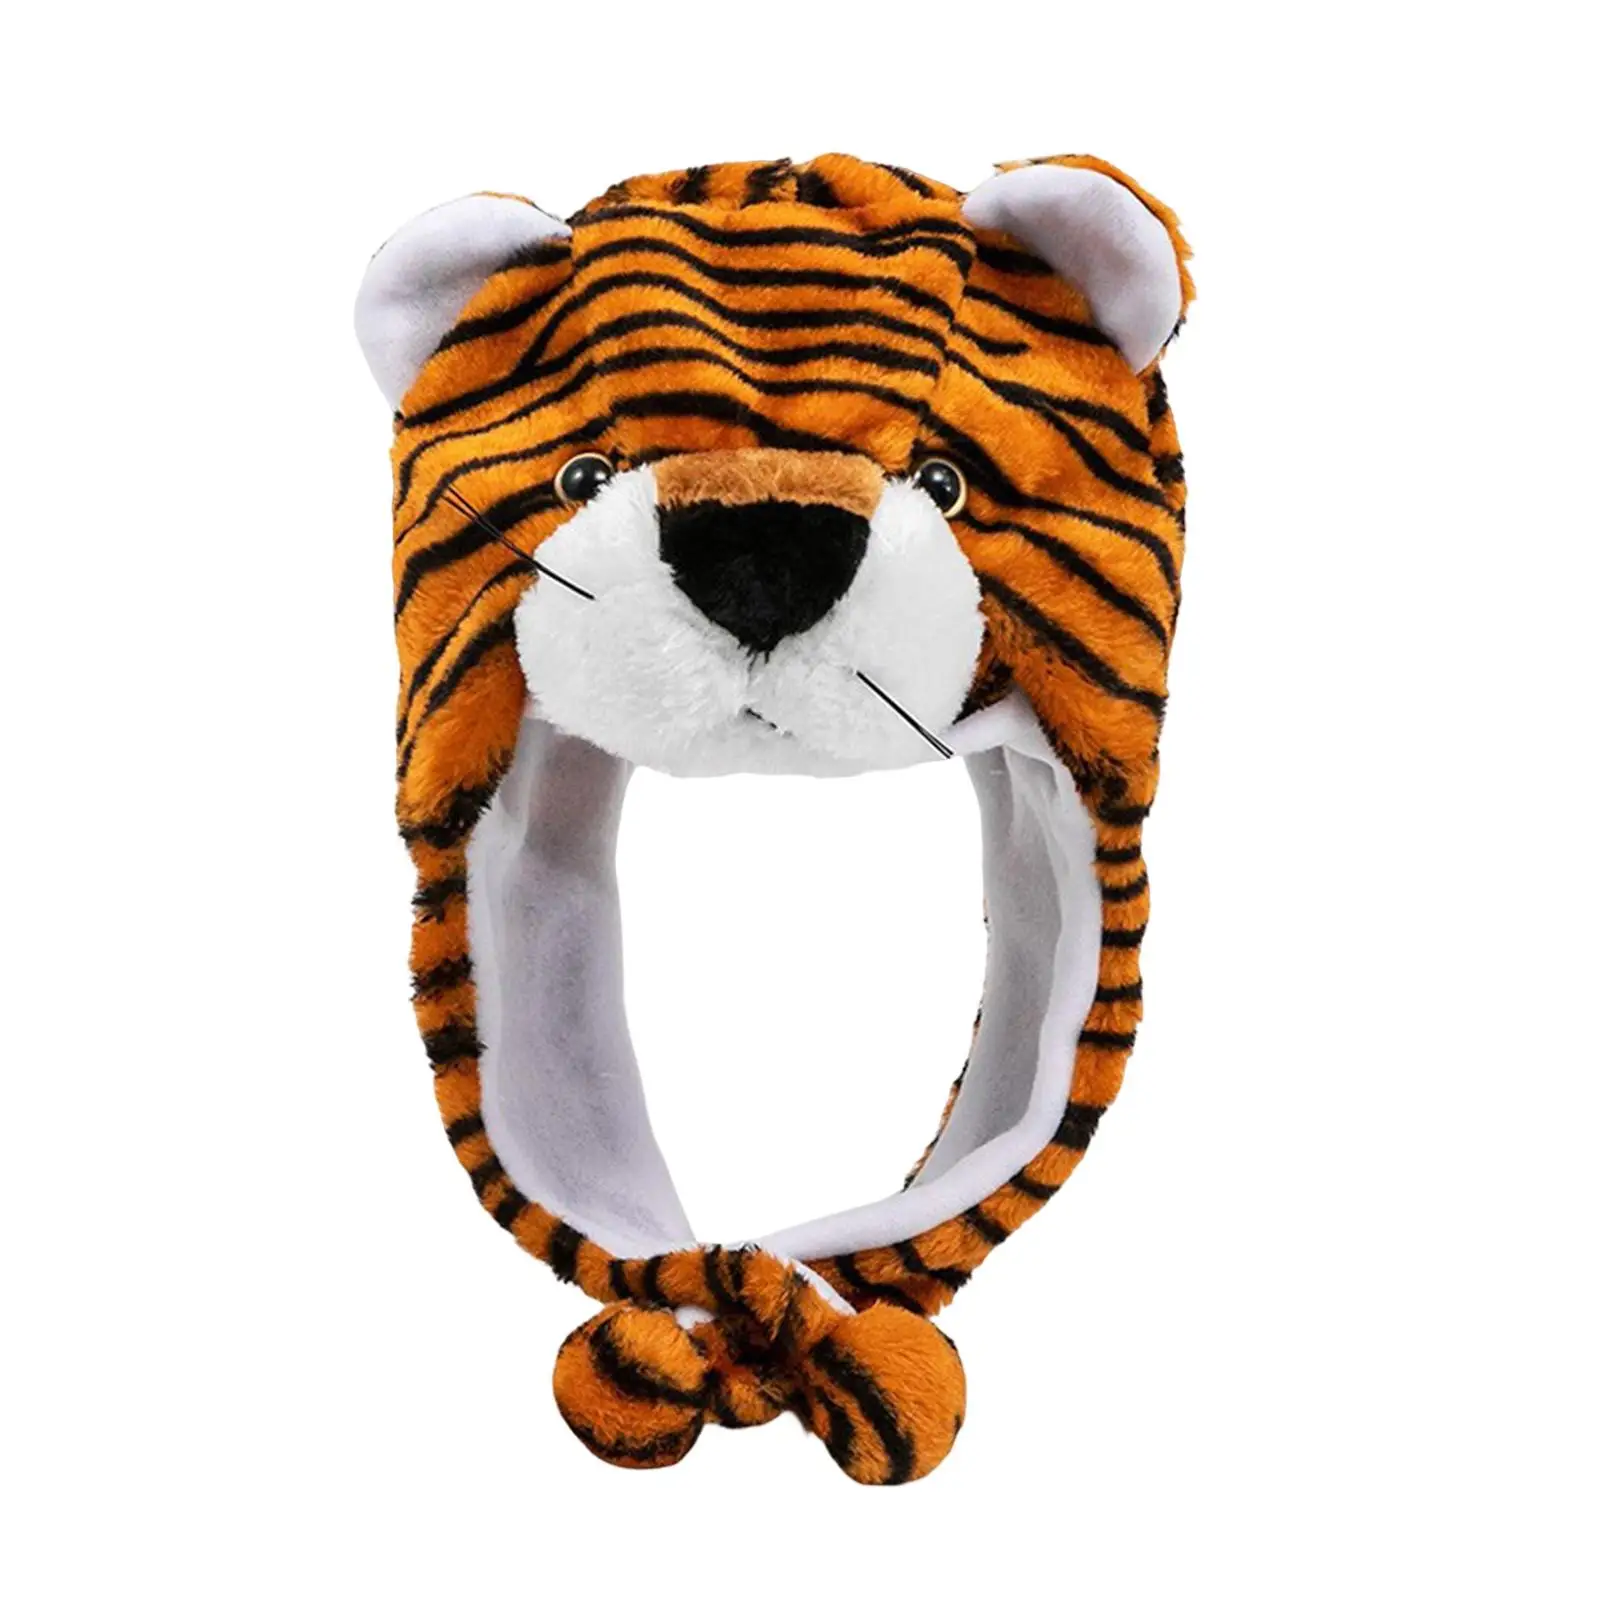 Plush Tiger Hat Stuffed Cap Headgear Photography Props Furry Hood Decorative Cute Holiday Gifts Soft Headwear for Masquerade